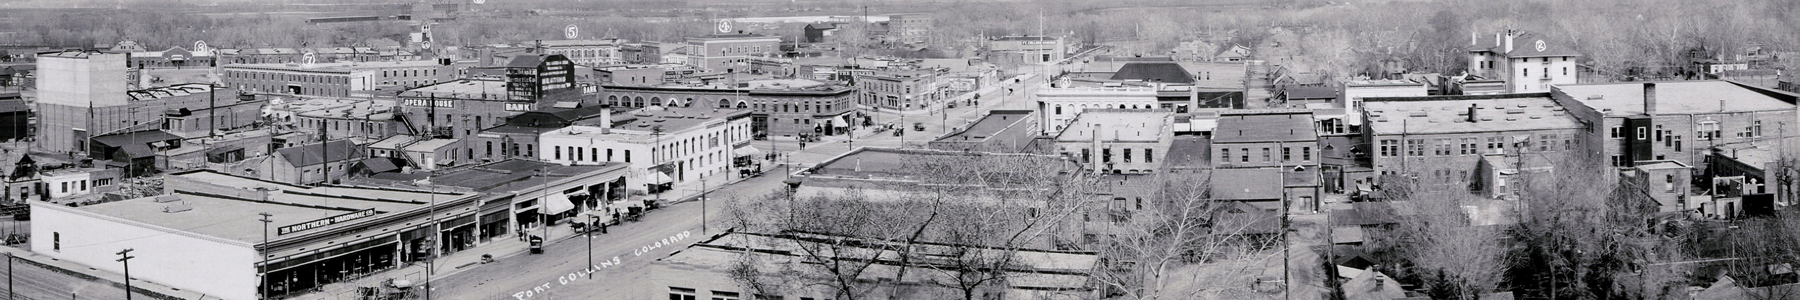 Panorama of Fort Collins, circa 1912, taken from the roof of the old Larimer County Courthouse